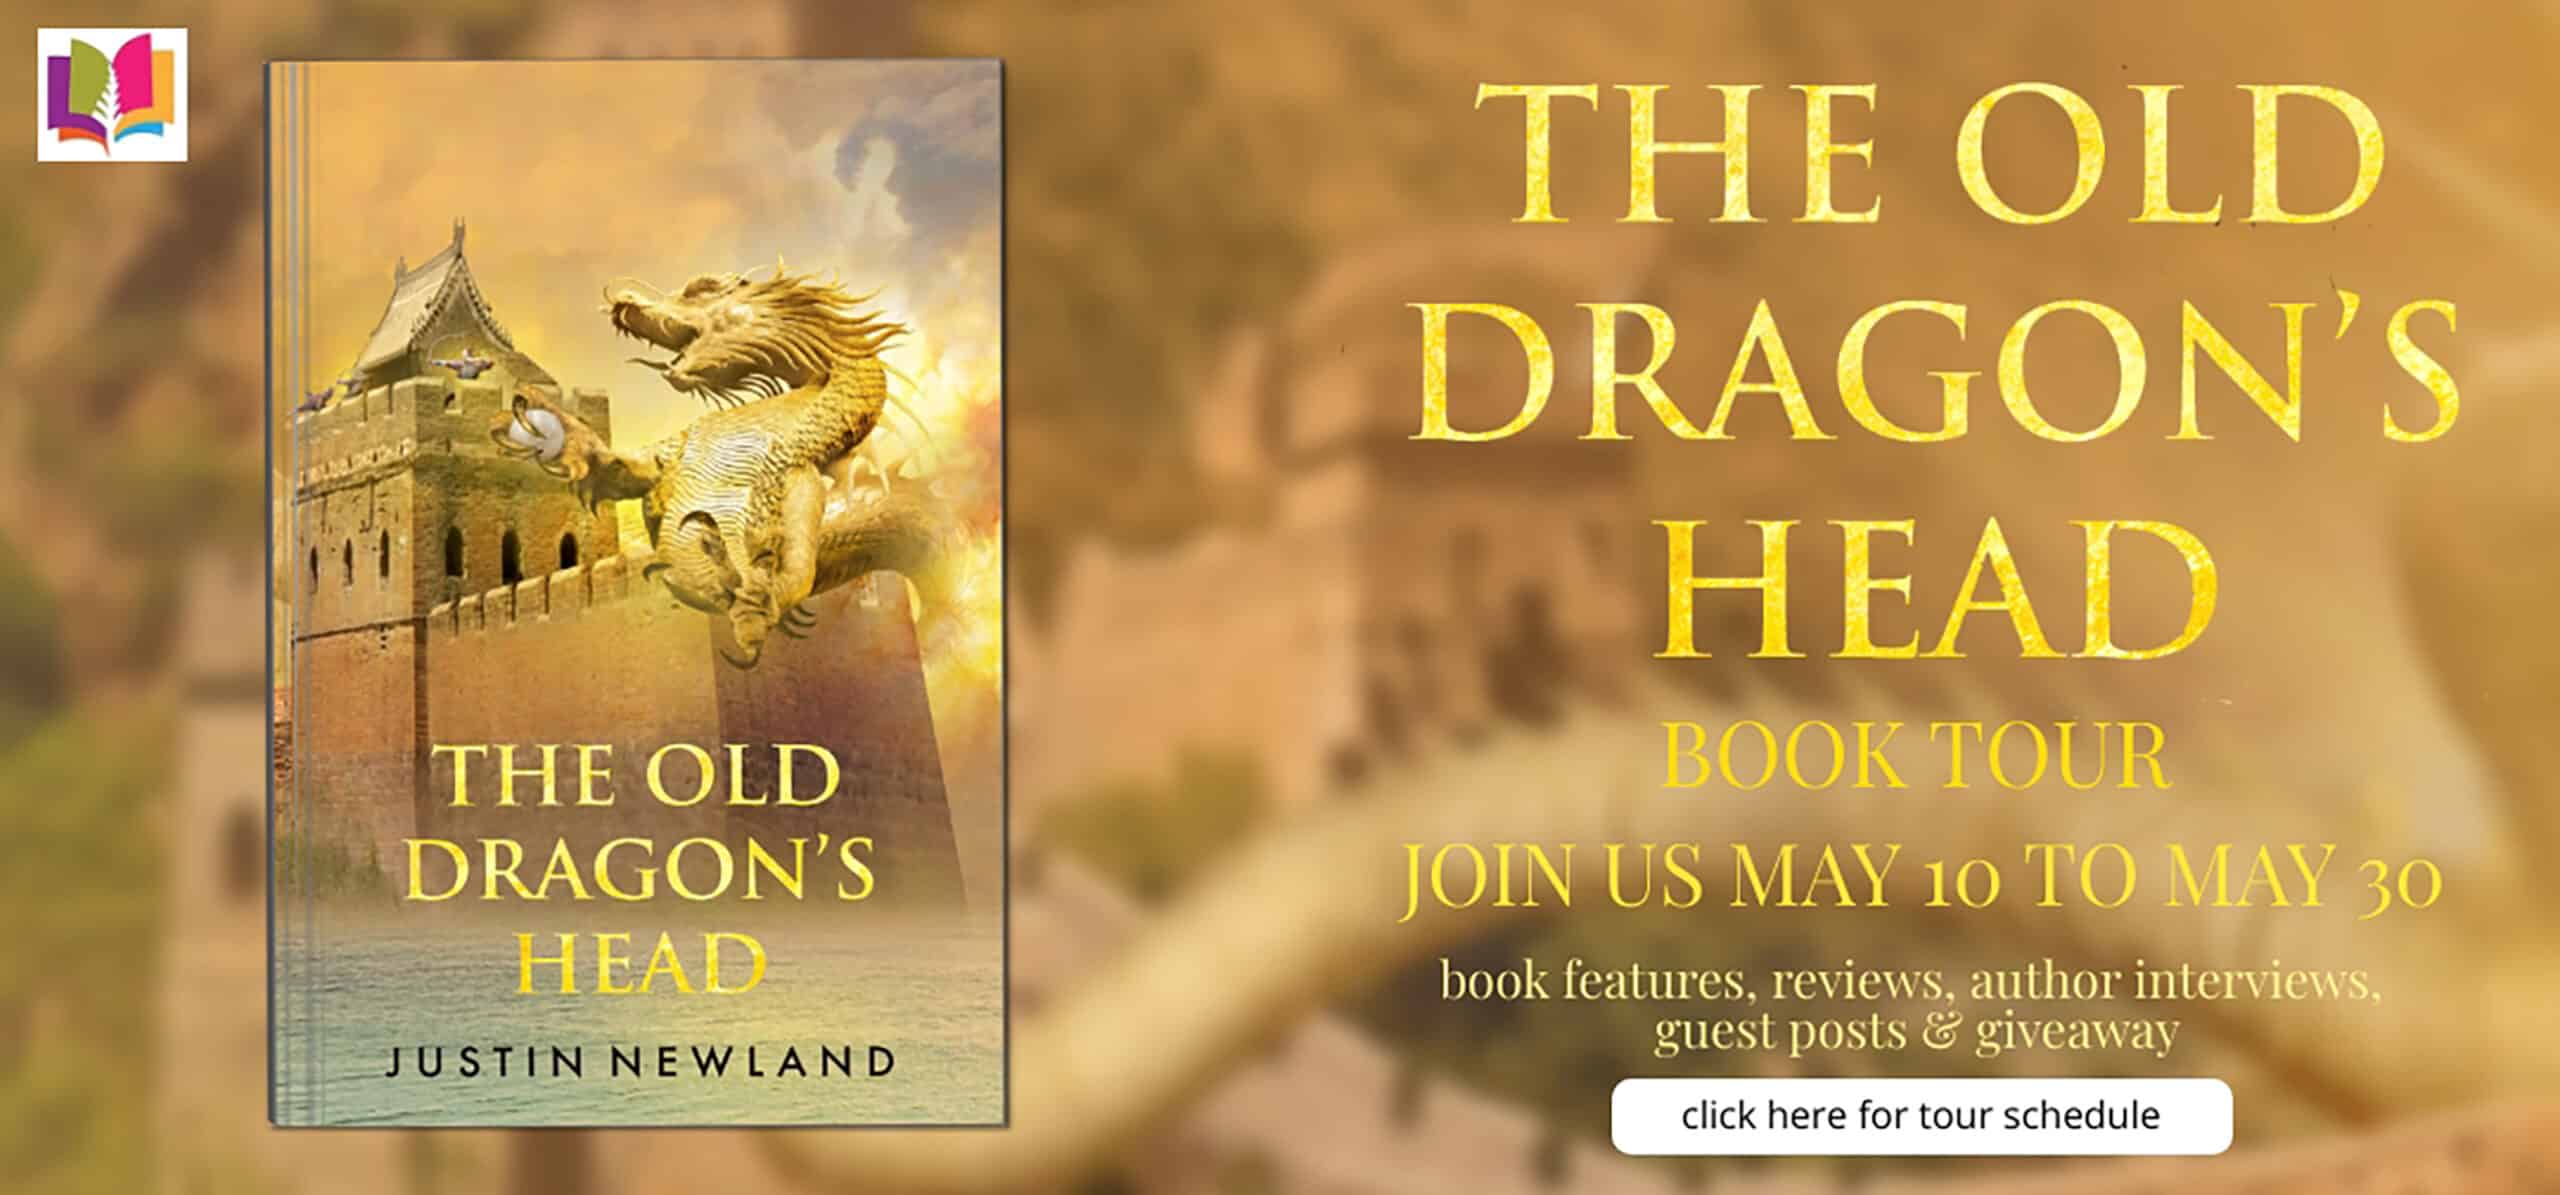 The Old Dragon's Head by Justin Newland | Video Book Excerpt ~ Guest Post & Interview with Author ~ Giveaway (3 Winners)